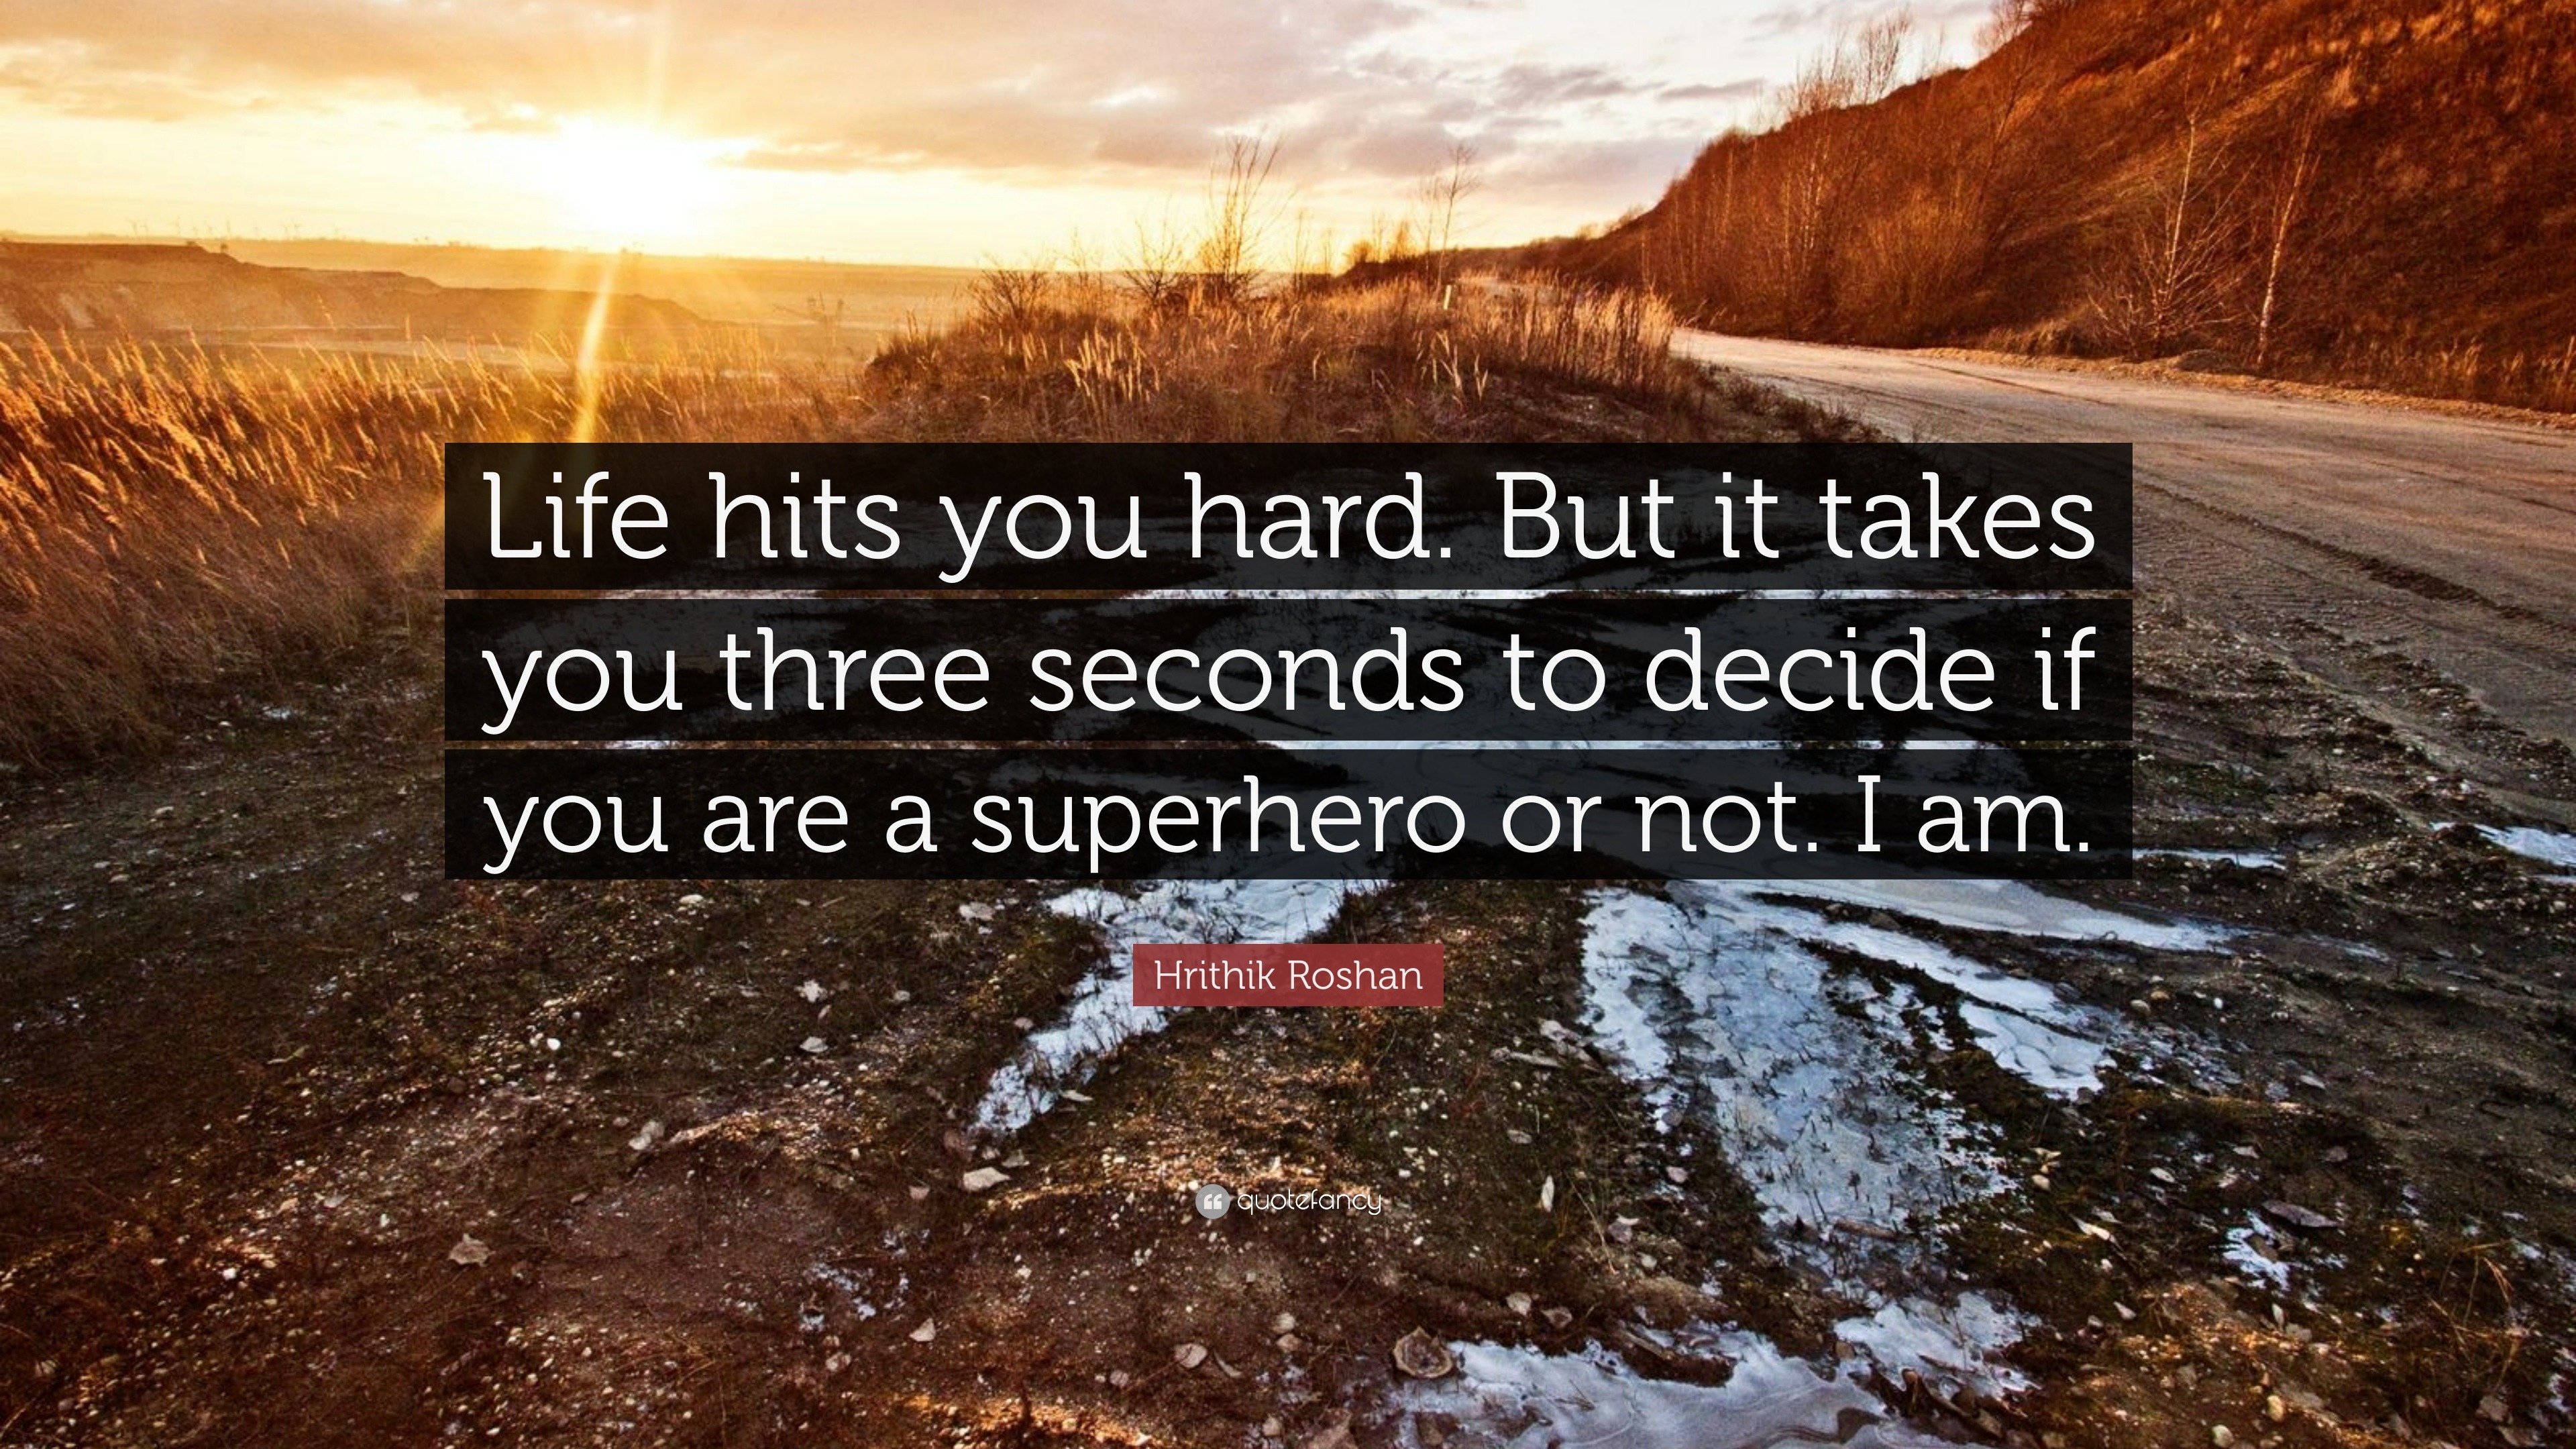 Hrithik Roshan Quote: “Life hits you hard. But it takes you three